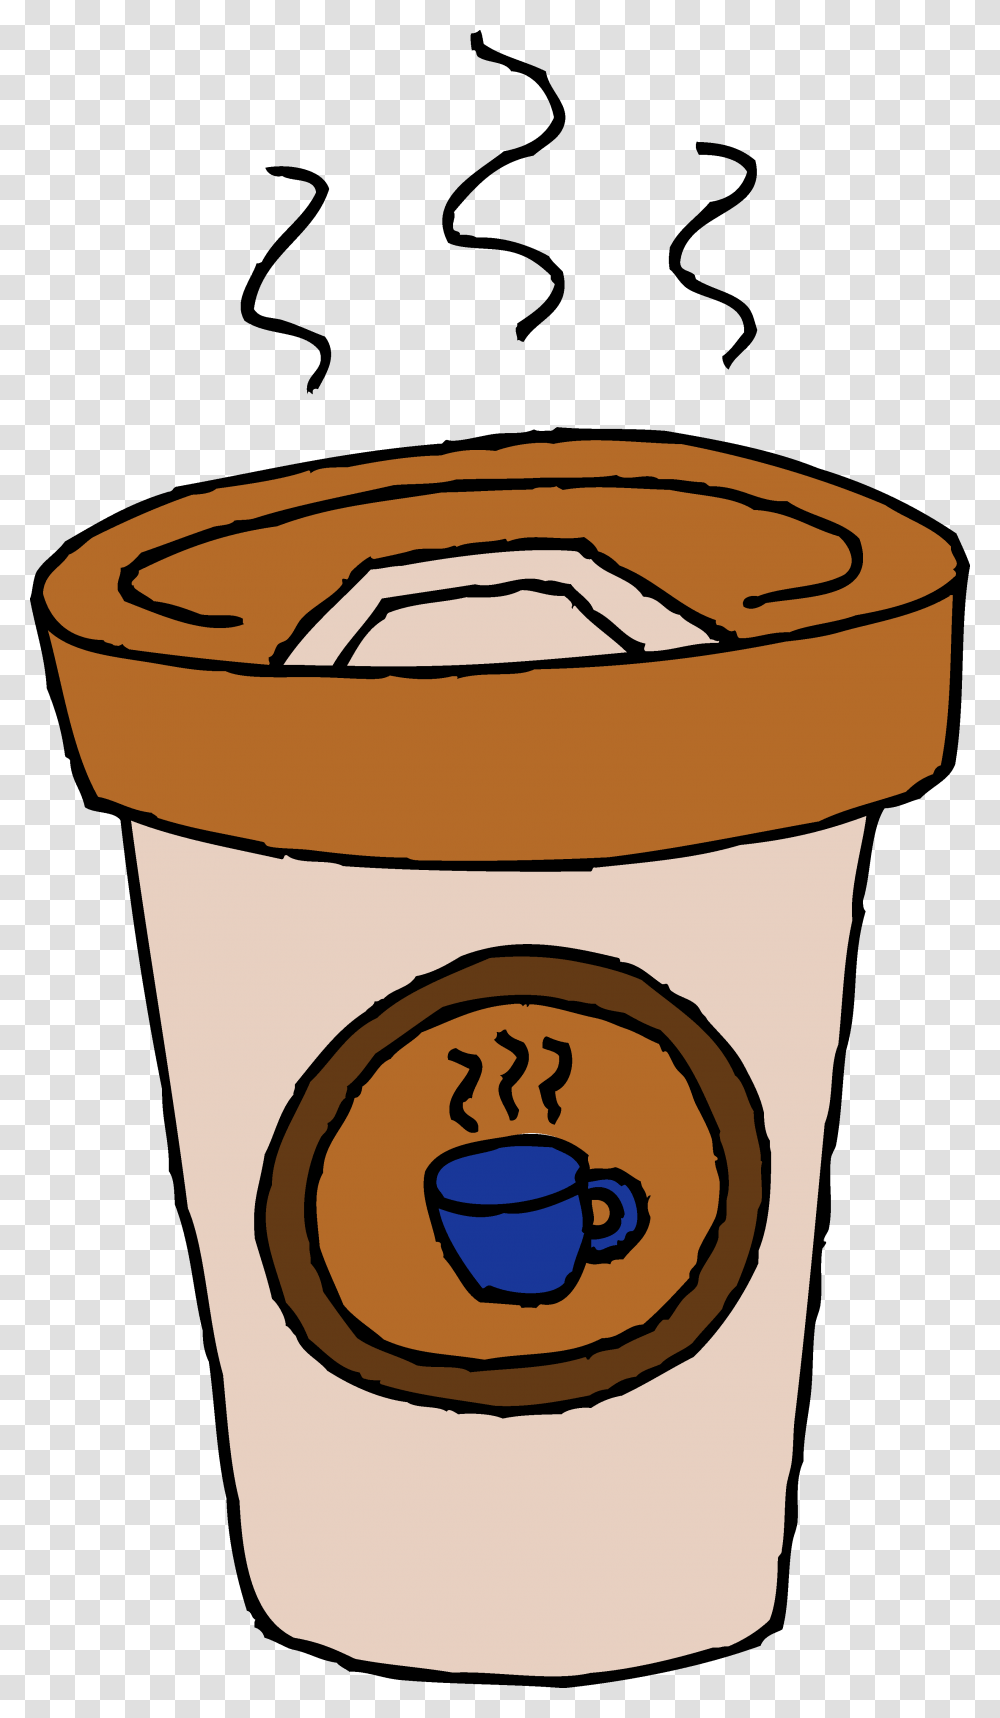 Coffee Cups Are Typically Made Of Glazed Ceramic And Have, Sweets, Food, Confectionery, Rug Transparent Png